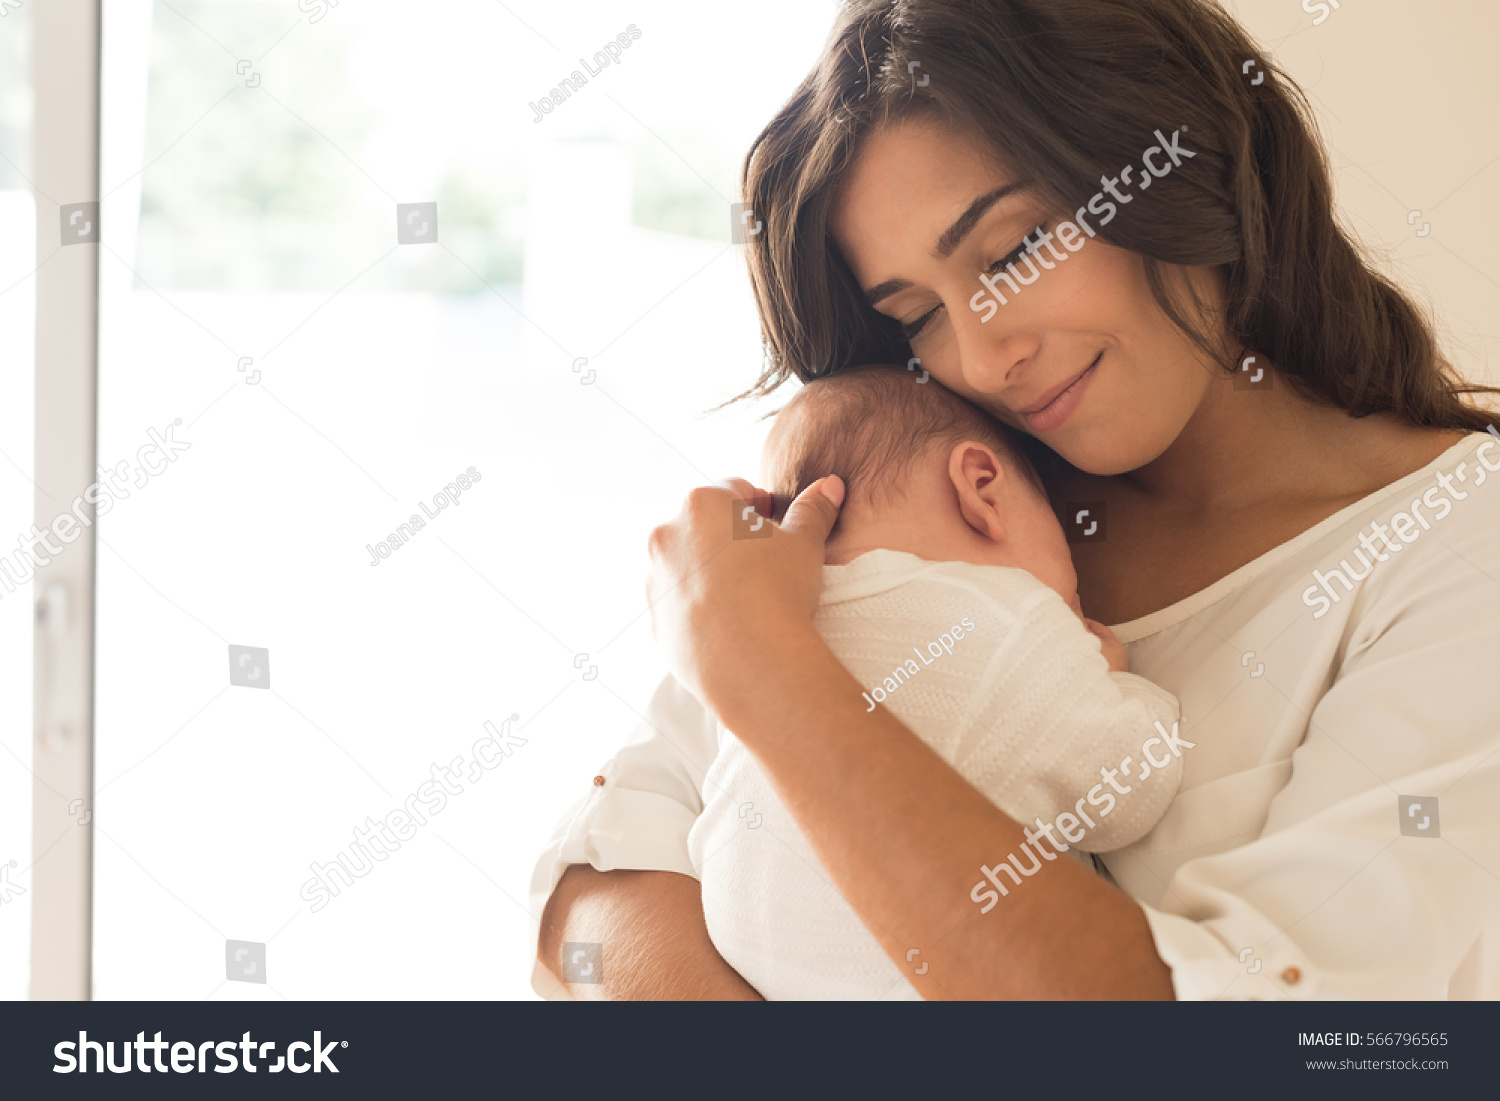 Pretty woman holding a newborn baby in her arms #566796565